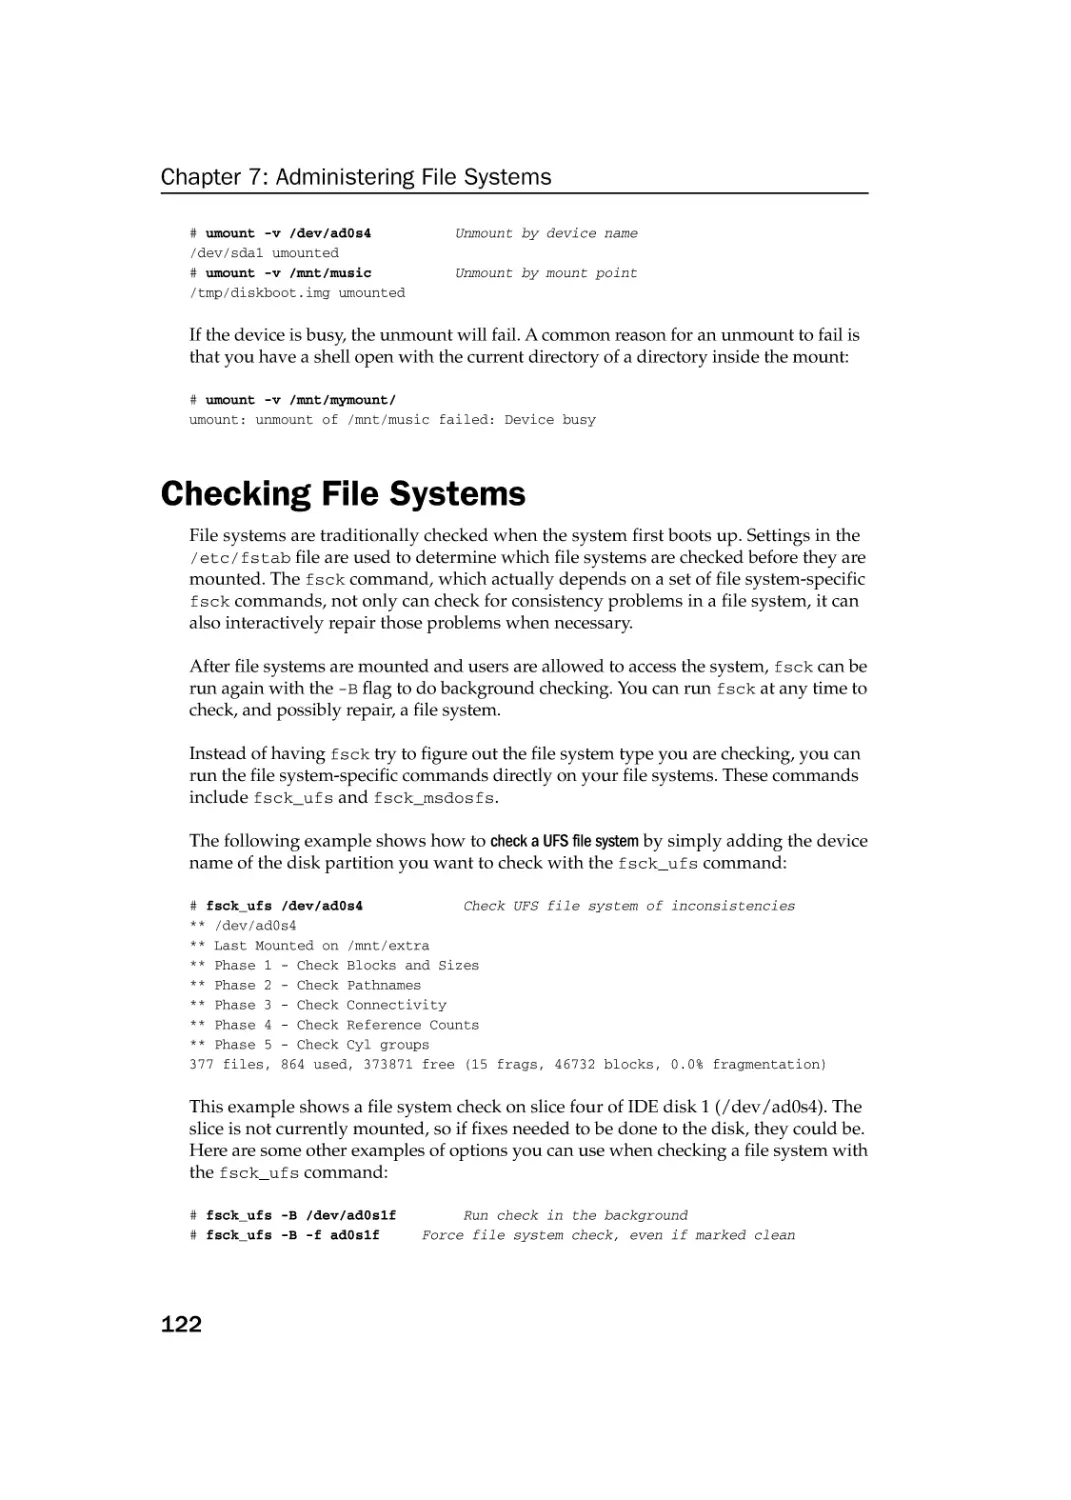 Checking File Systems